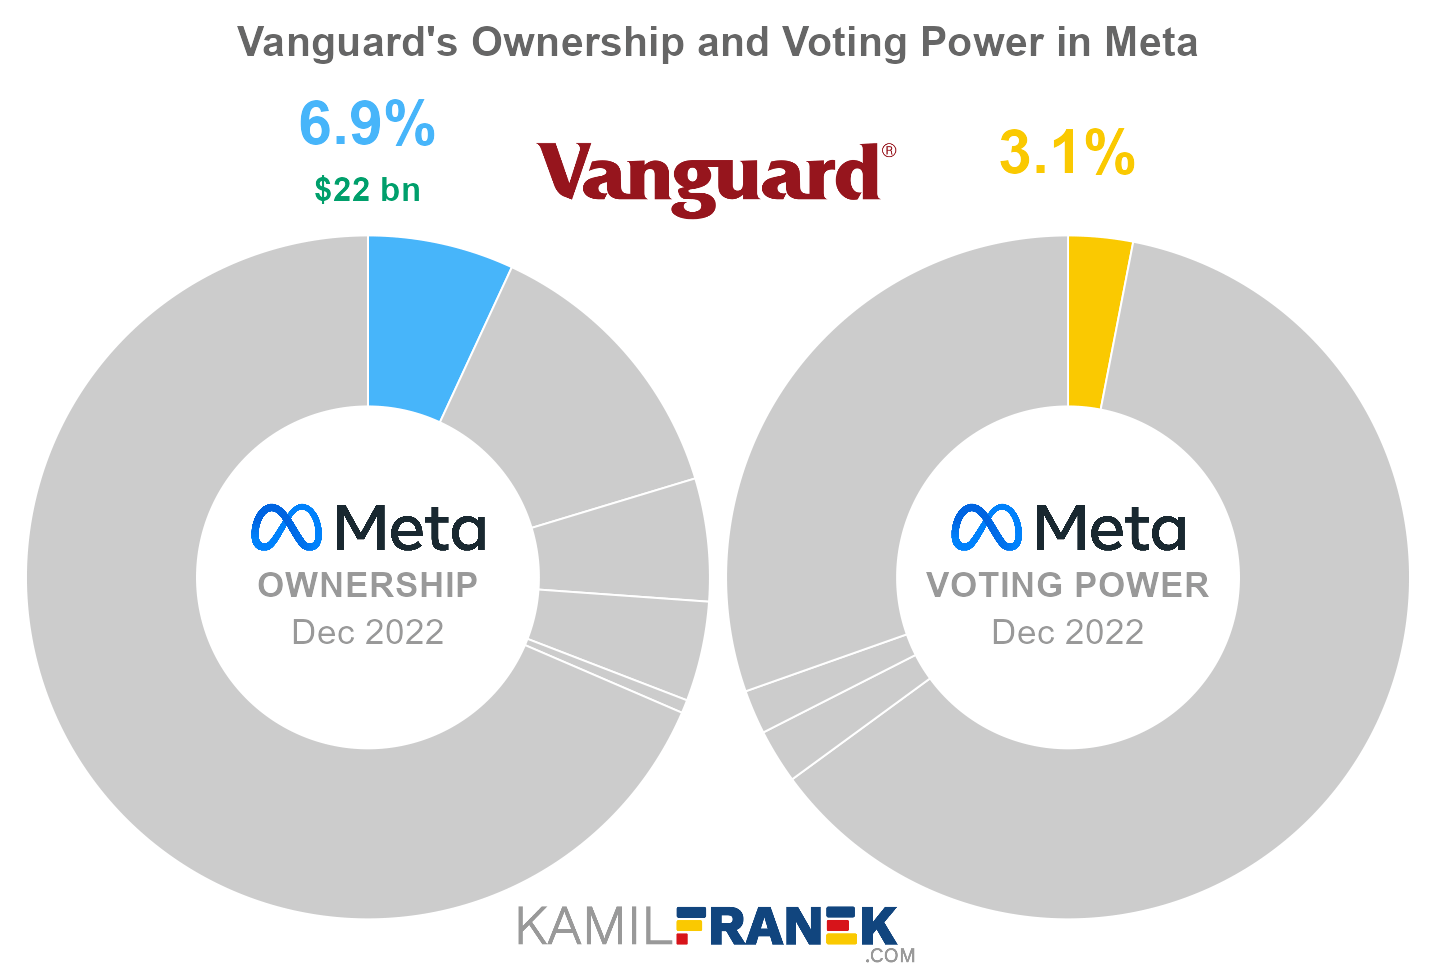 Vanguard's share ownership and voting power in Meta (chart)